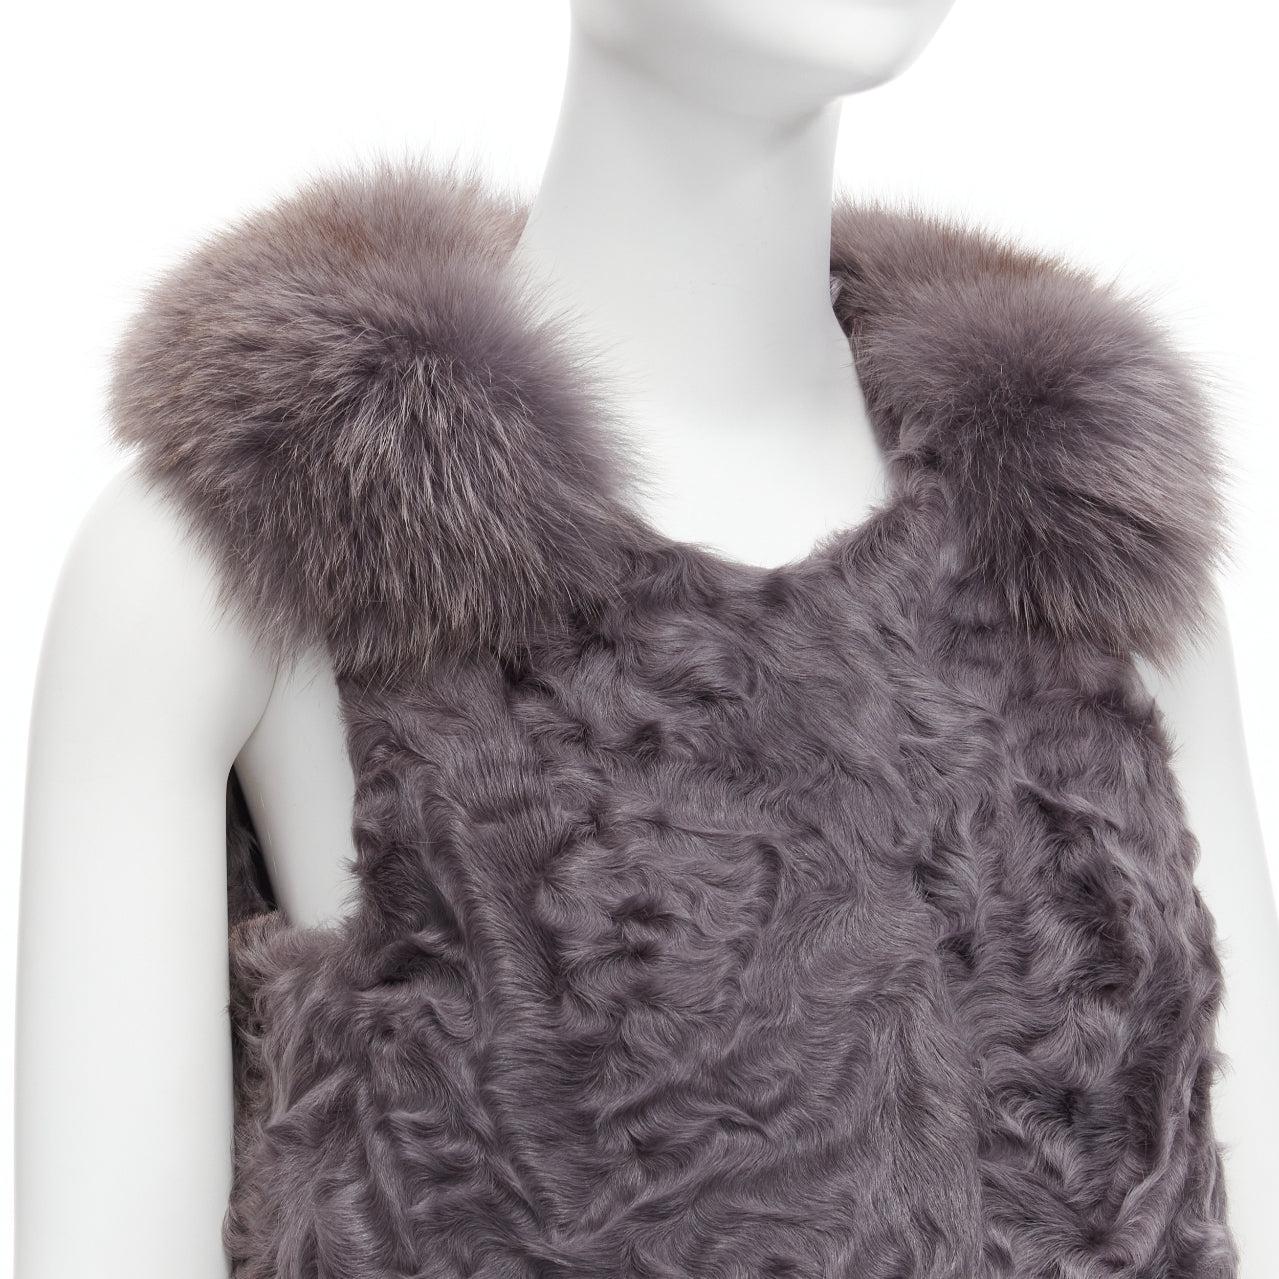 PELLICCISSIMA grey Astrakhan fur collar sleeveless winter vest jacket S
Reference: SNKO/A00381
Brand: Pelliccissima
Material: Fur, Fur
Color: Grey
Pattern: Solid
Closure: Hook & Eye
Lining: Grey Fabric

CONDITION:
Condition: Excellent, this item was